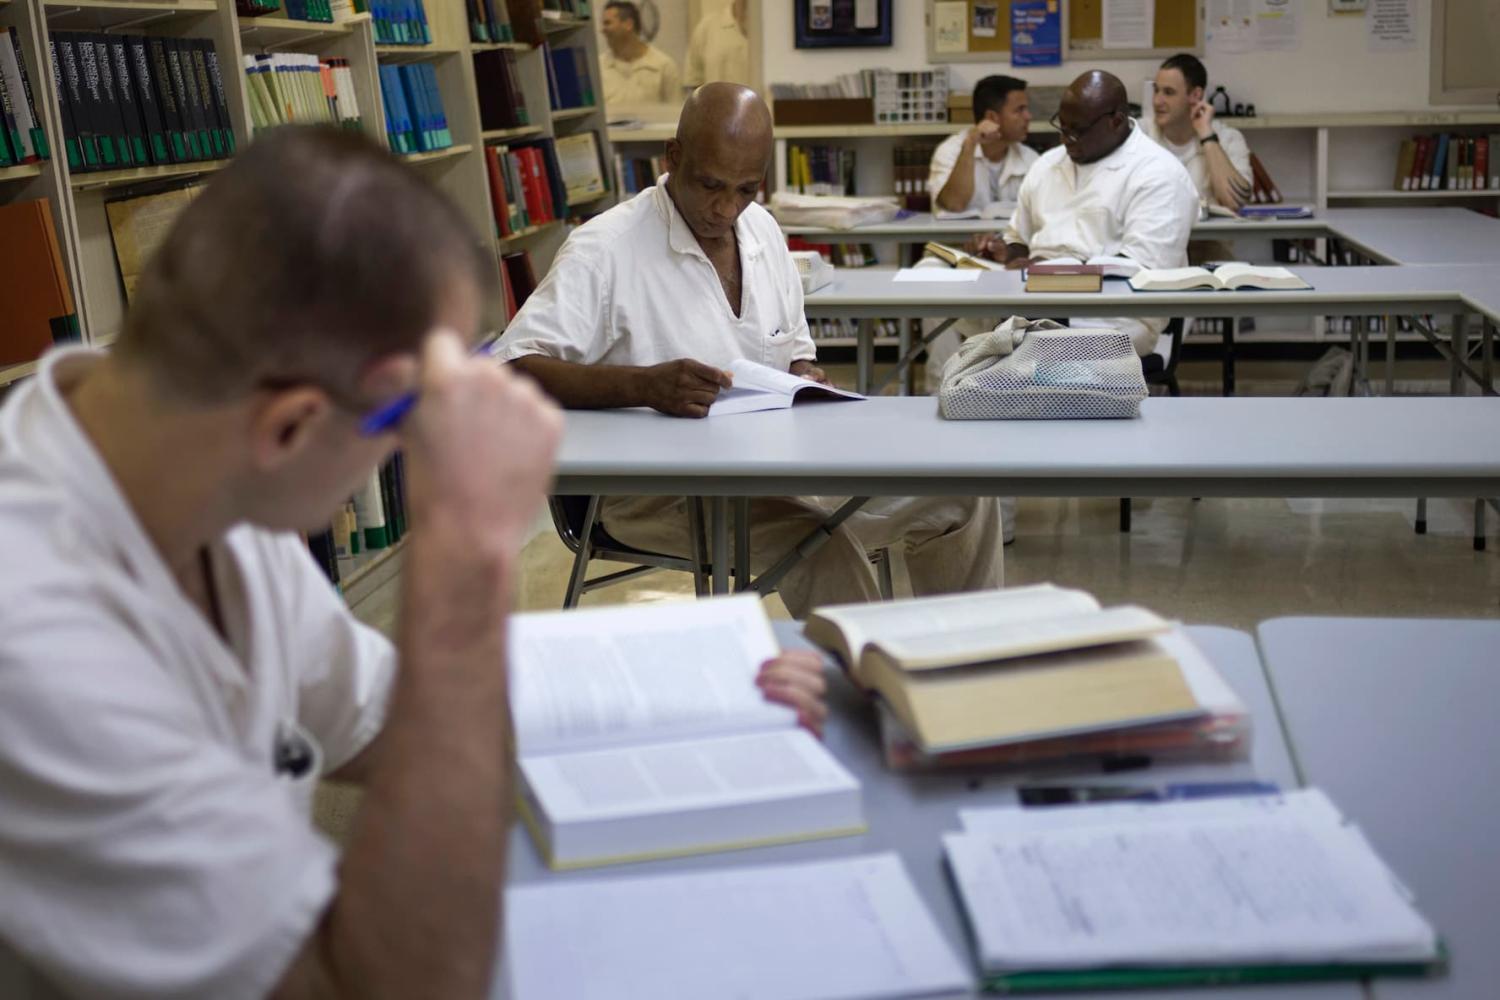 Students read books and write papers at a library inside the Southwestern Baptist Theological Seminary located in the Darrington Unit of the Texas Department of Criminal Justice men's prison in Rosharon, Texas August 12, 2014.